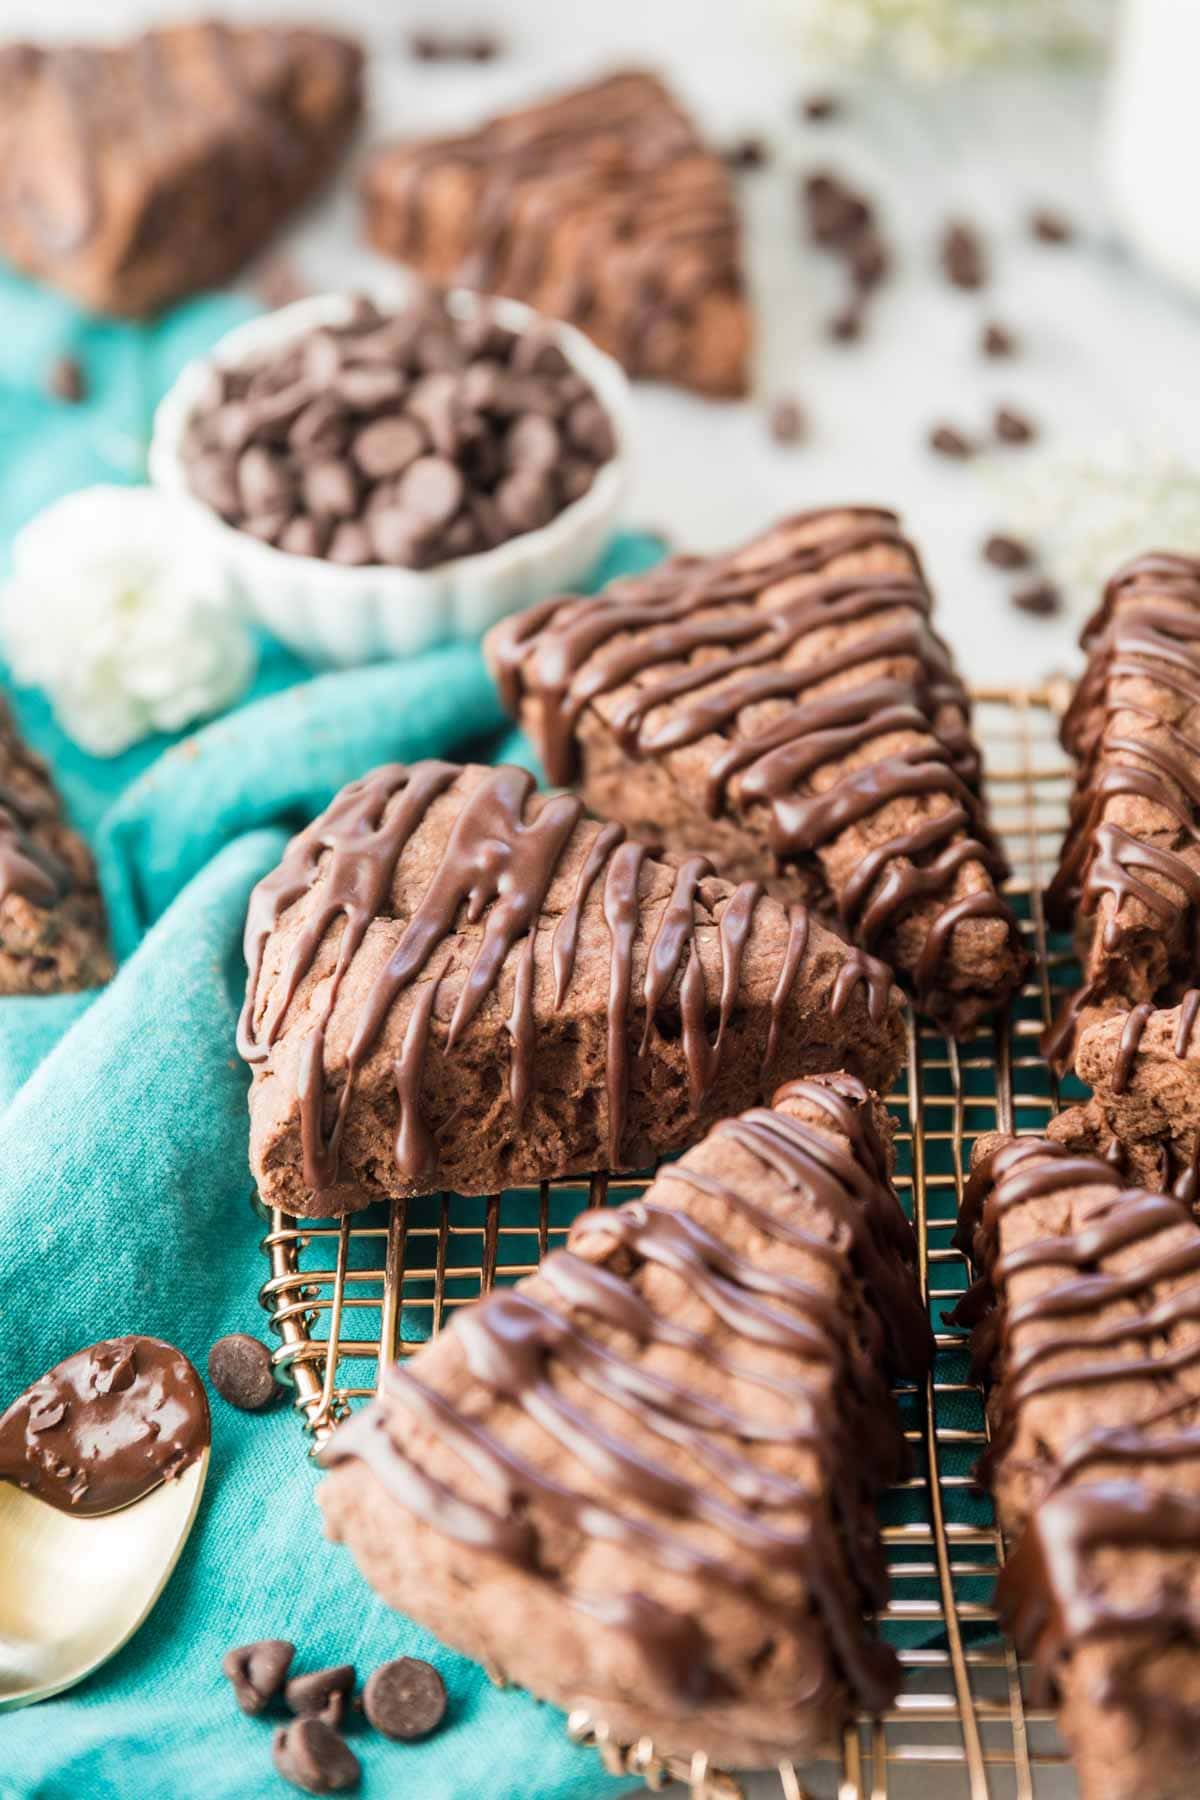 wedge-shaped chocolate scones drizzled with a chocolate glaze on a metal cooling rack